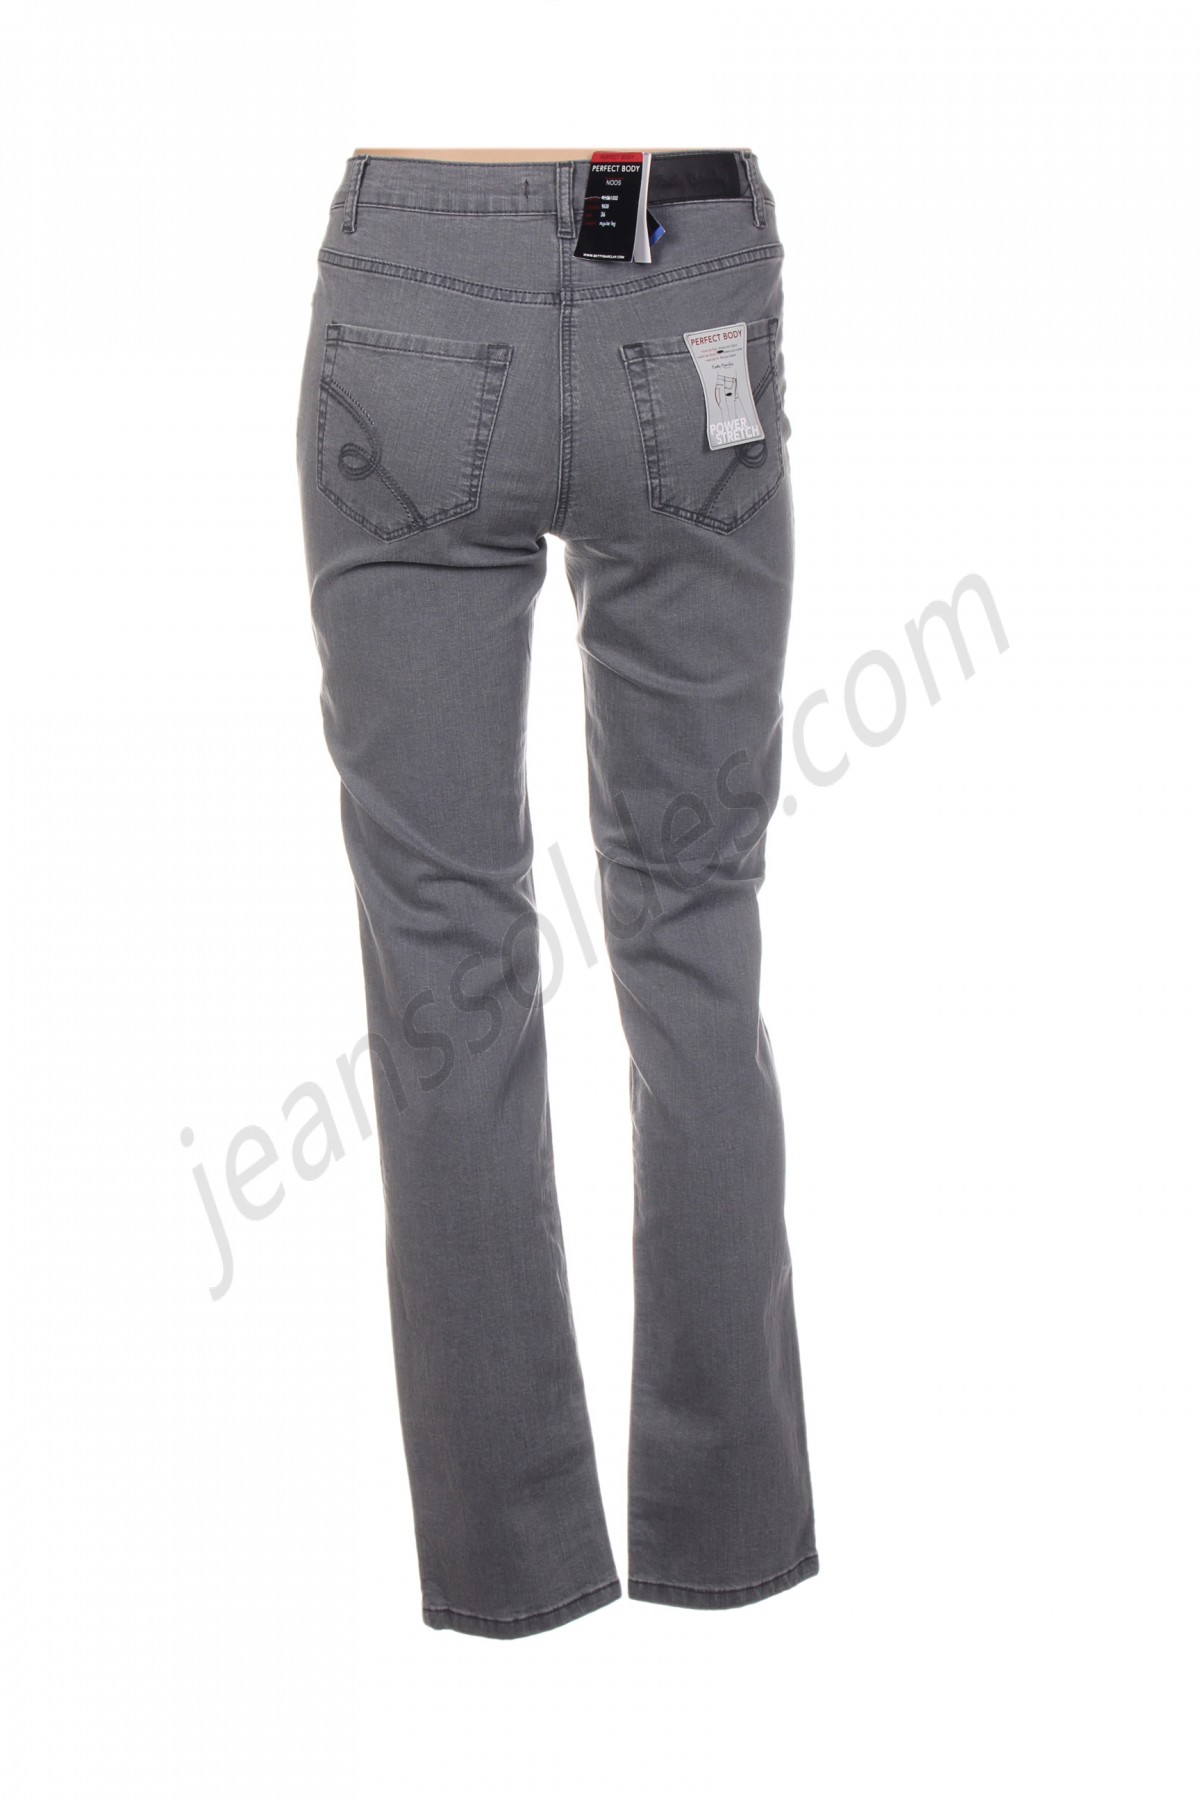 betty barclay-Jeans coupe droite prix d’amis - -1